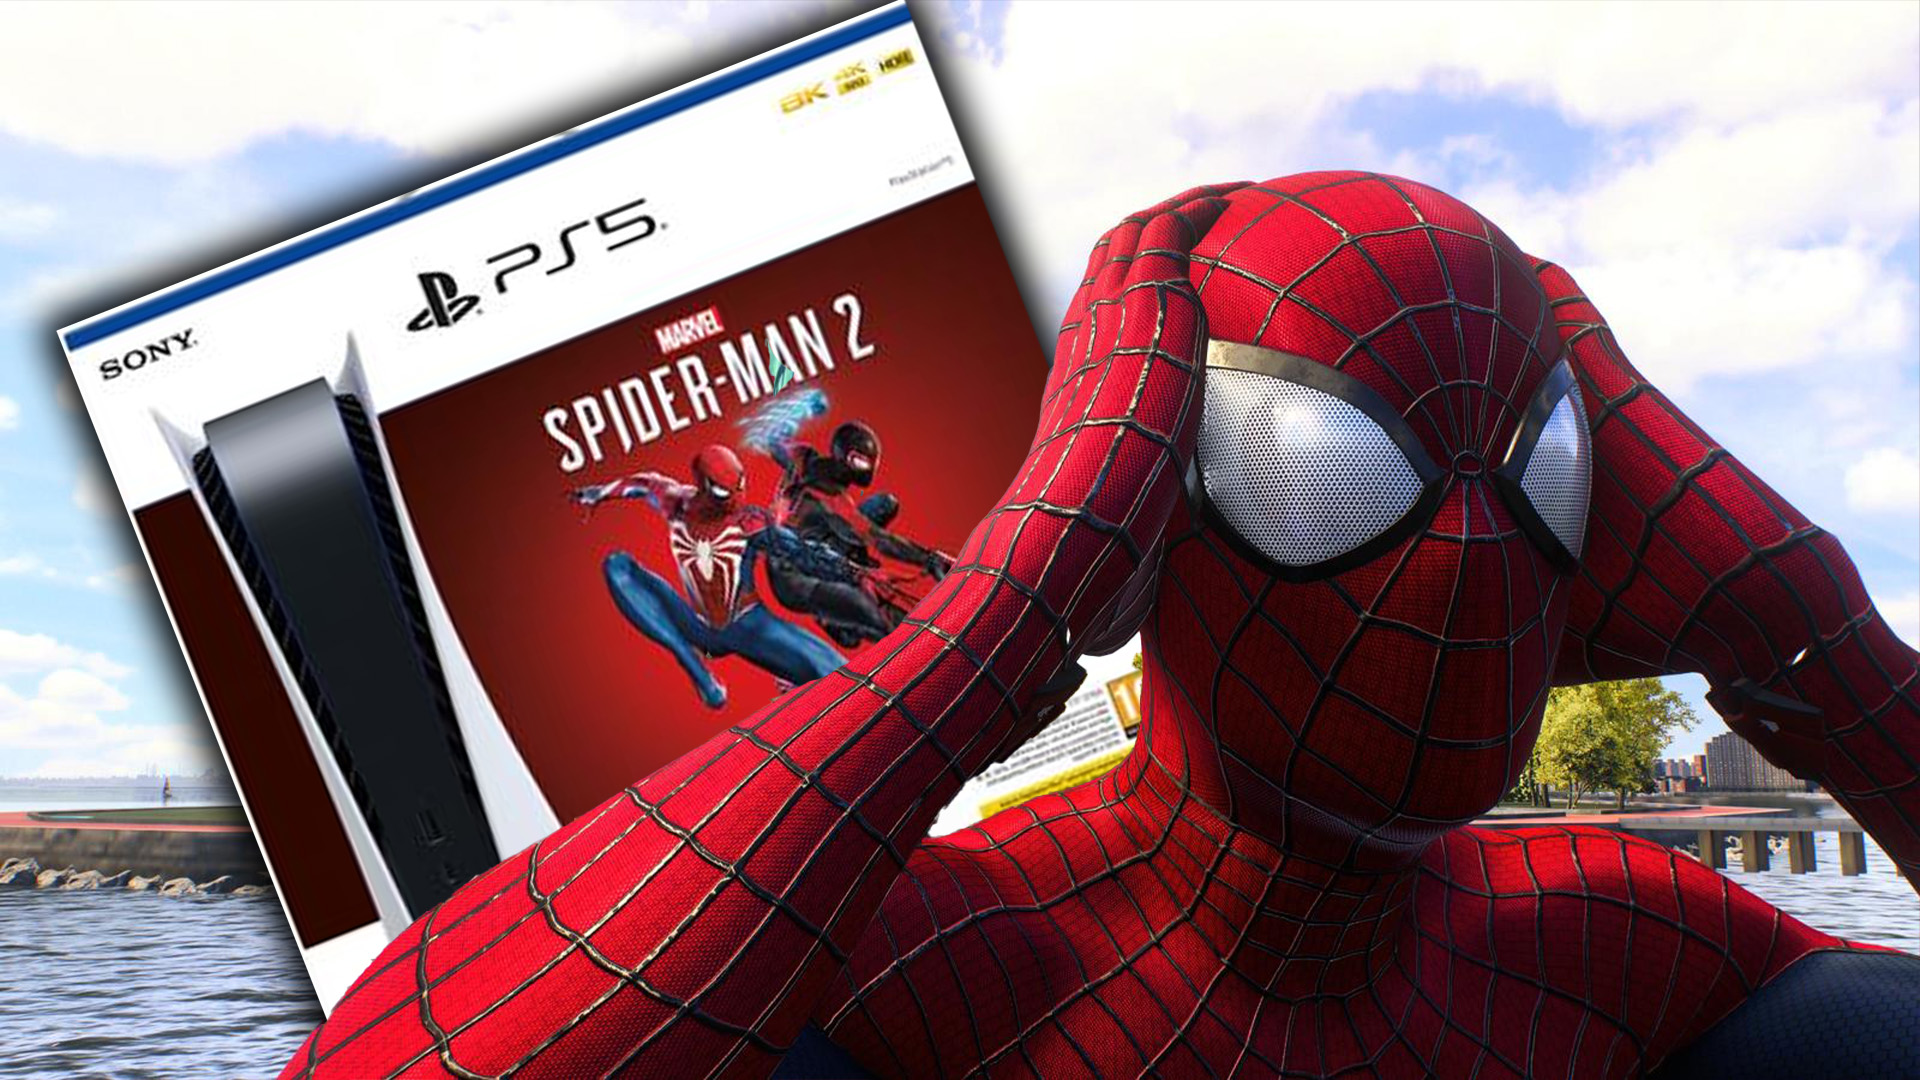 Get Spider-Man 2 for free in this PS5 bundle deal before it disappears